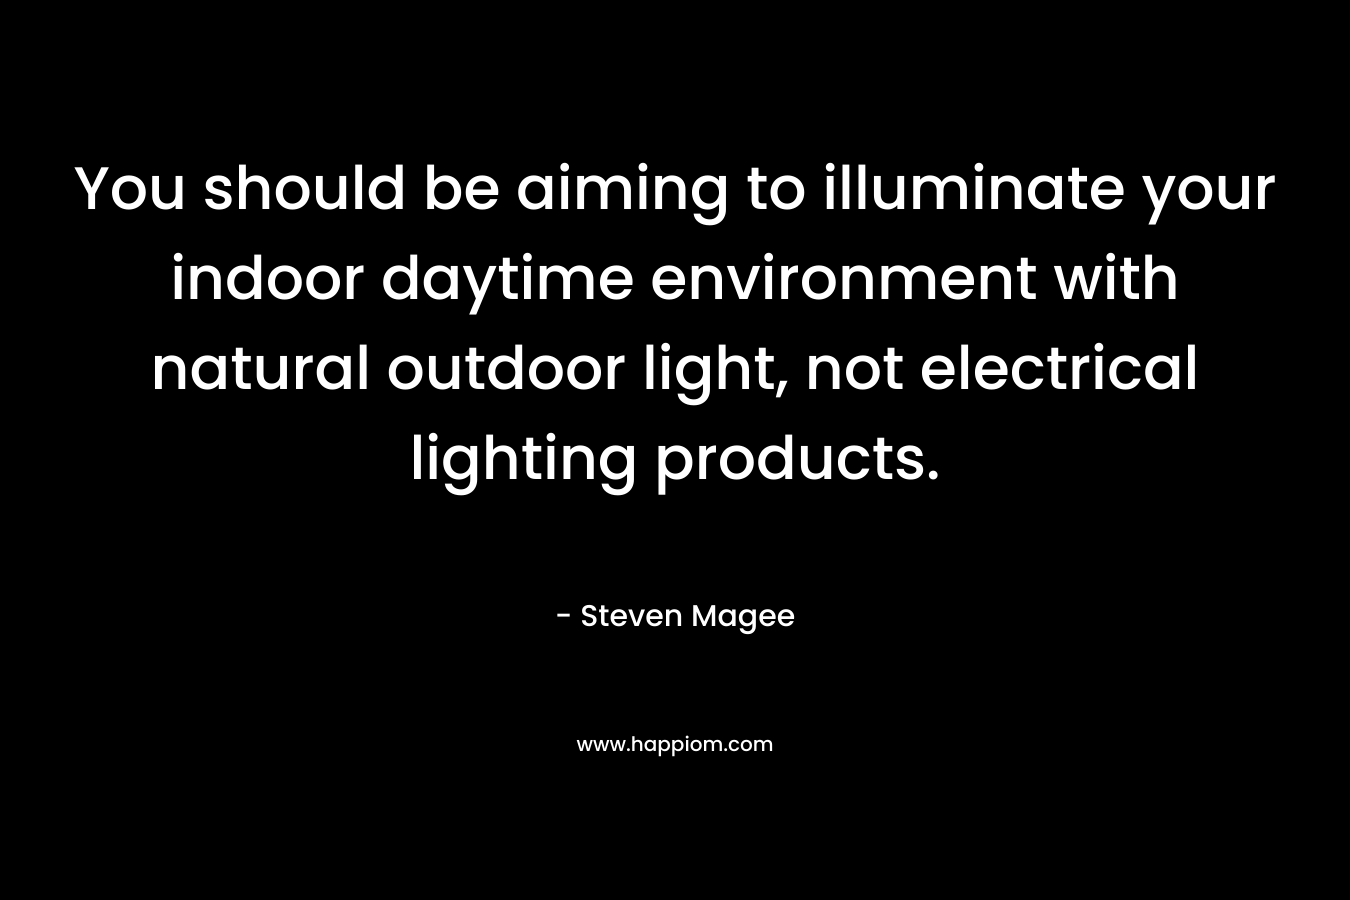 You should be aiming to illuminate your indoor daytime environment with natural outdoor light, not electrical lighting products.